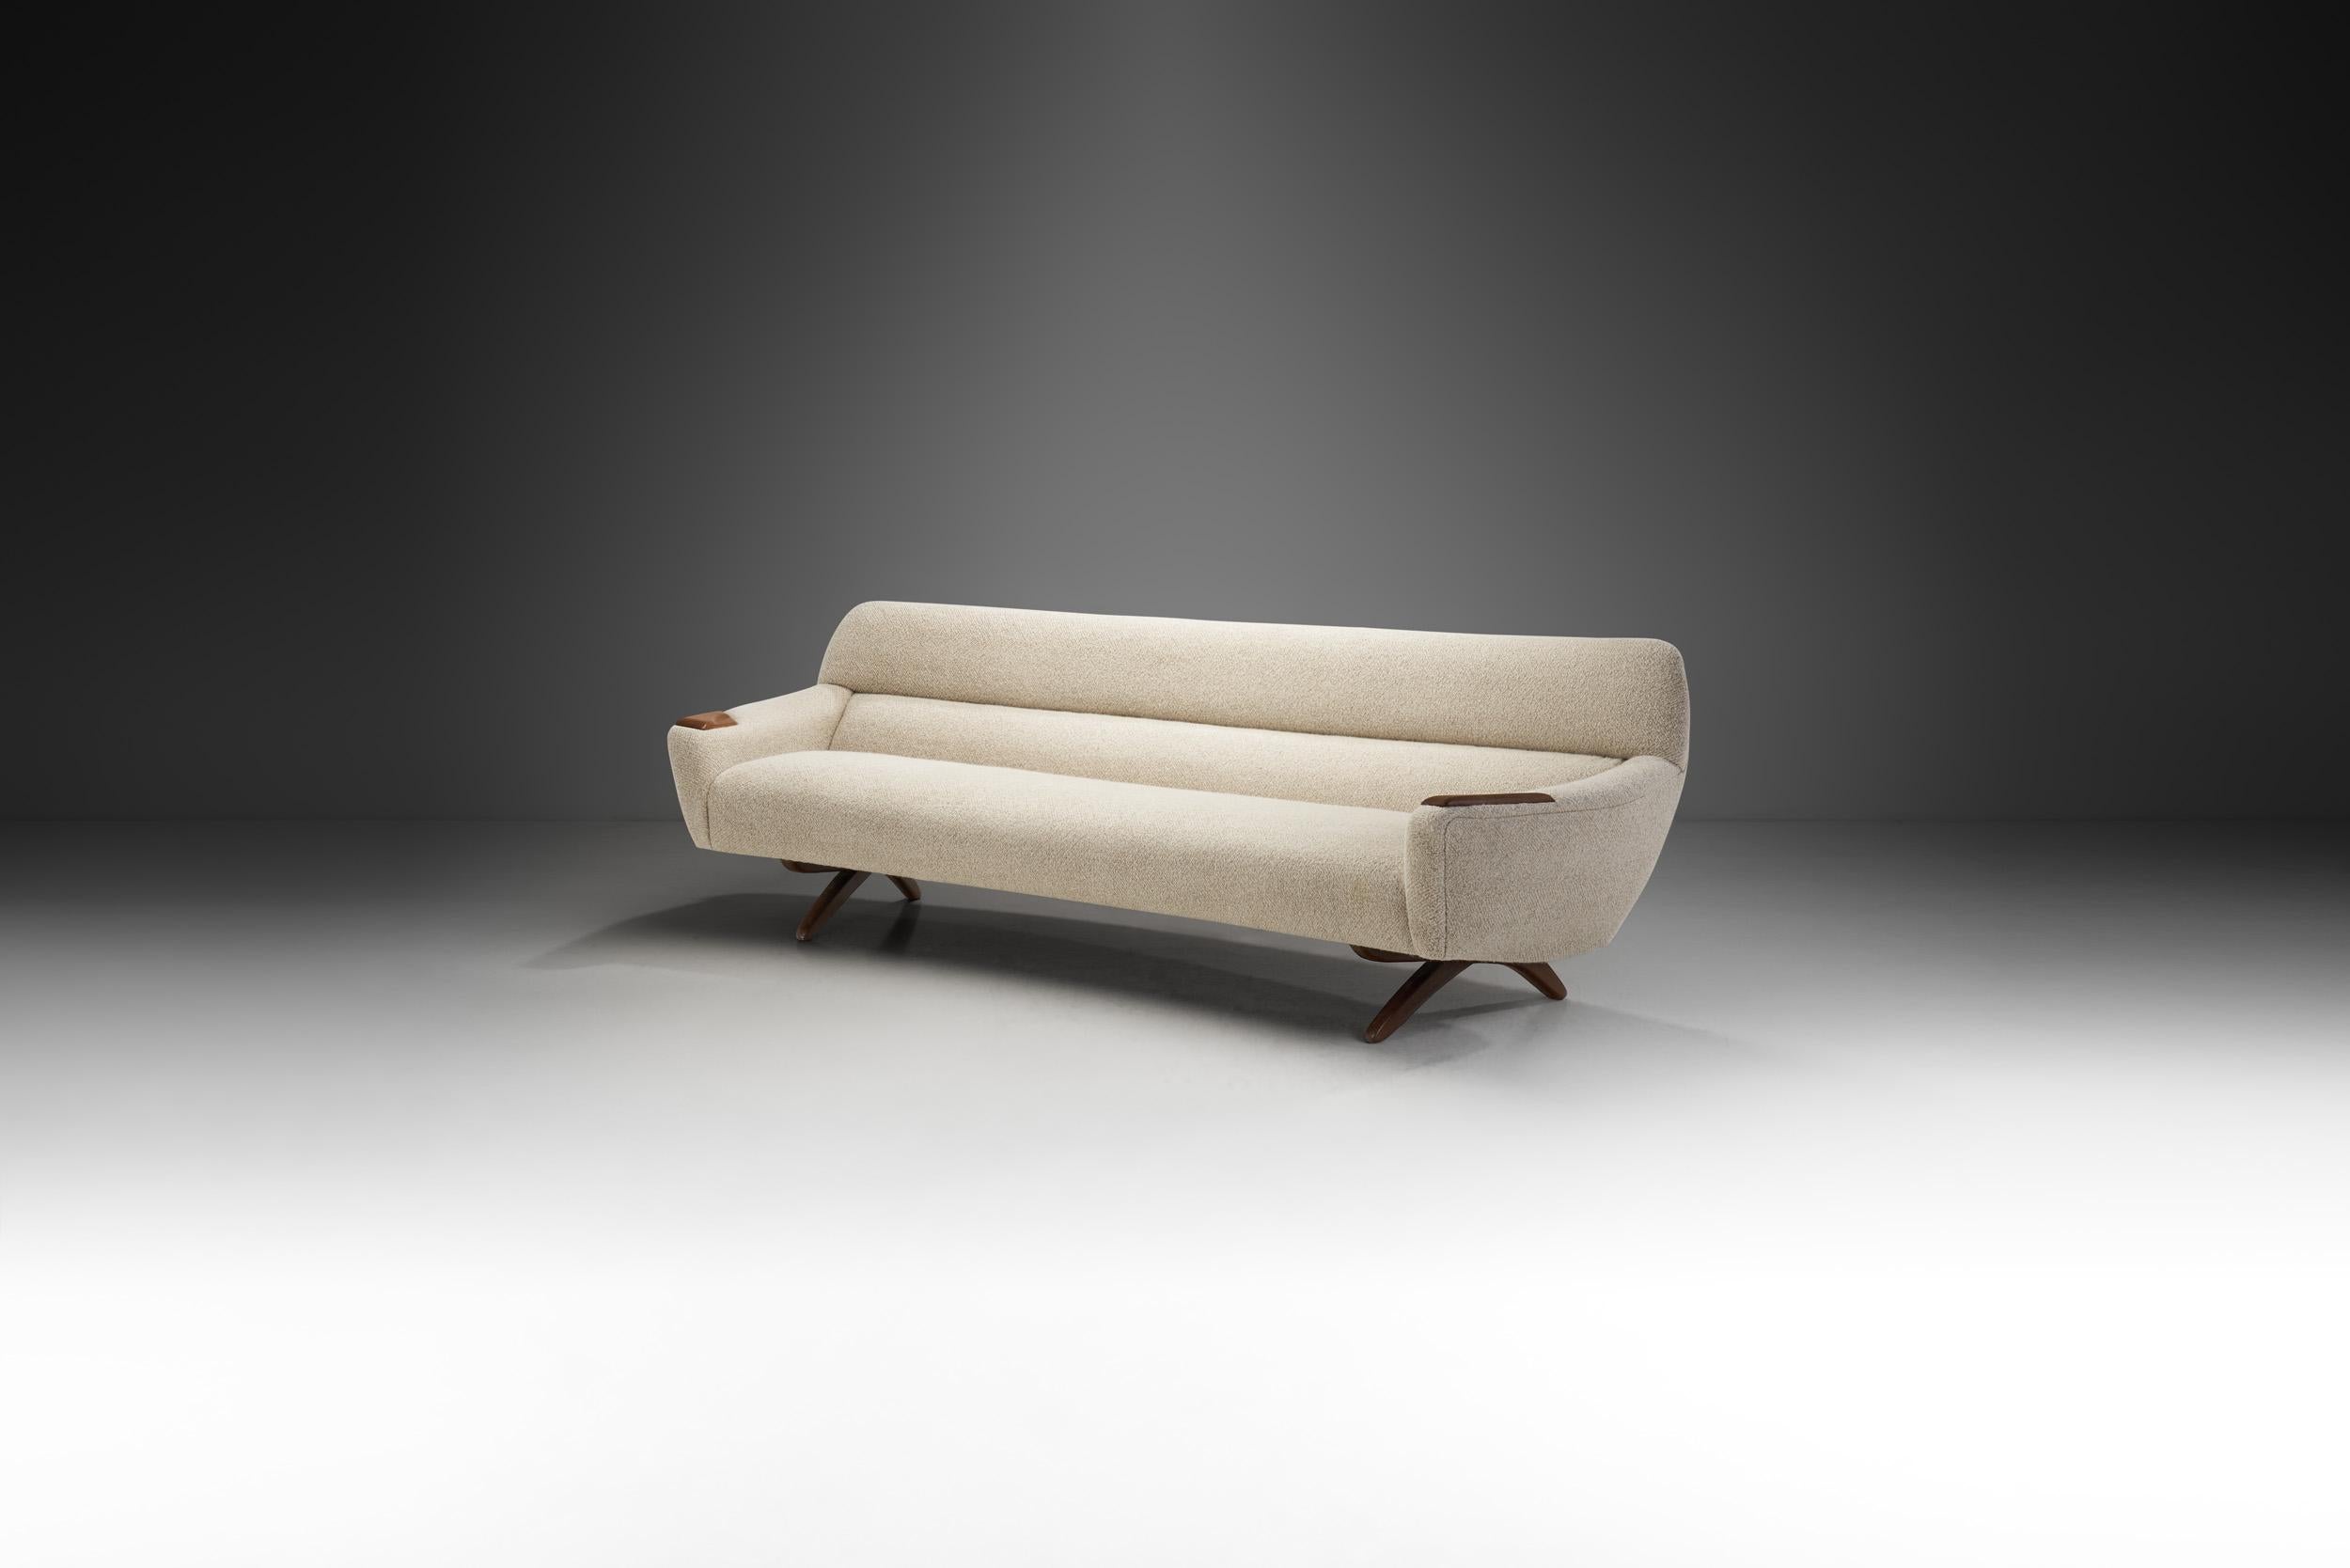 Leif Hansen’s Model 62 sofa is commonly referred to as the “Geisha” and was designed in 1959. This model is a strikingly elegant example of Danish modernism’s streamlined, luxurious aesthetic appeal to contemporary eyes.

This three-seater sofa is